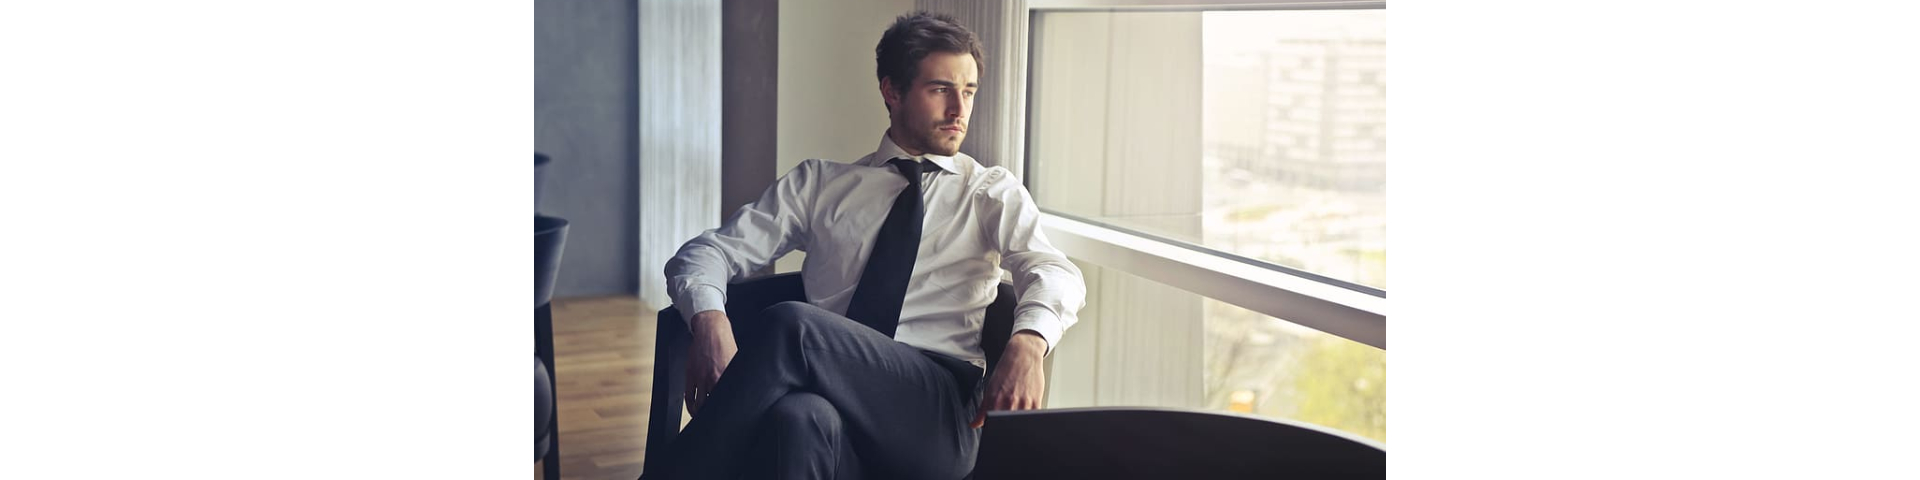 an image of a person wearing a white dress shirt while sitting